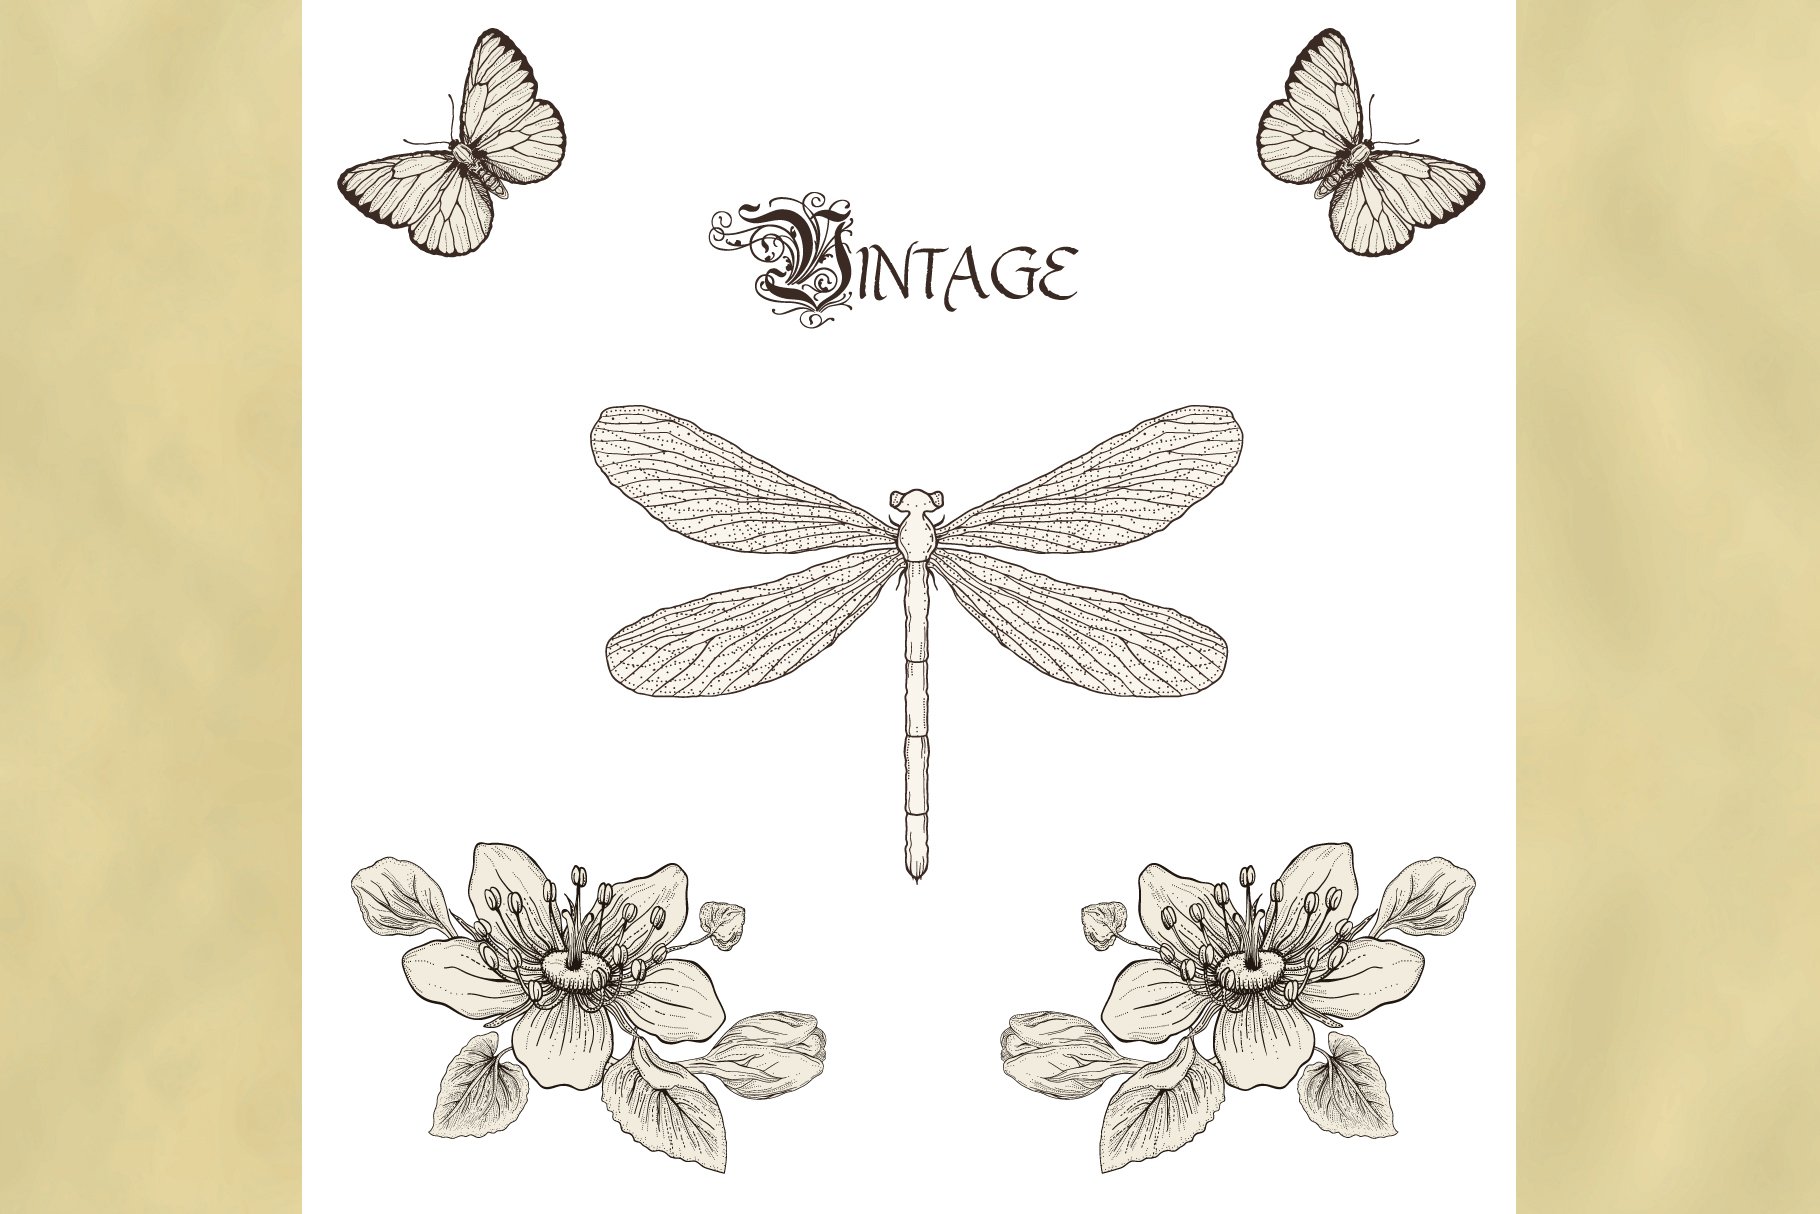 Insects&Flowers. Engraving style cover image.